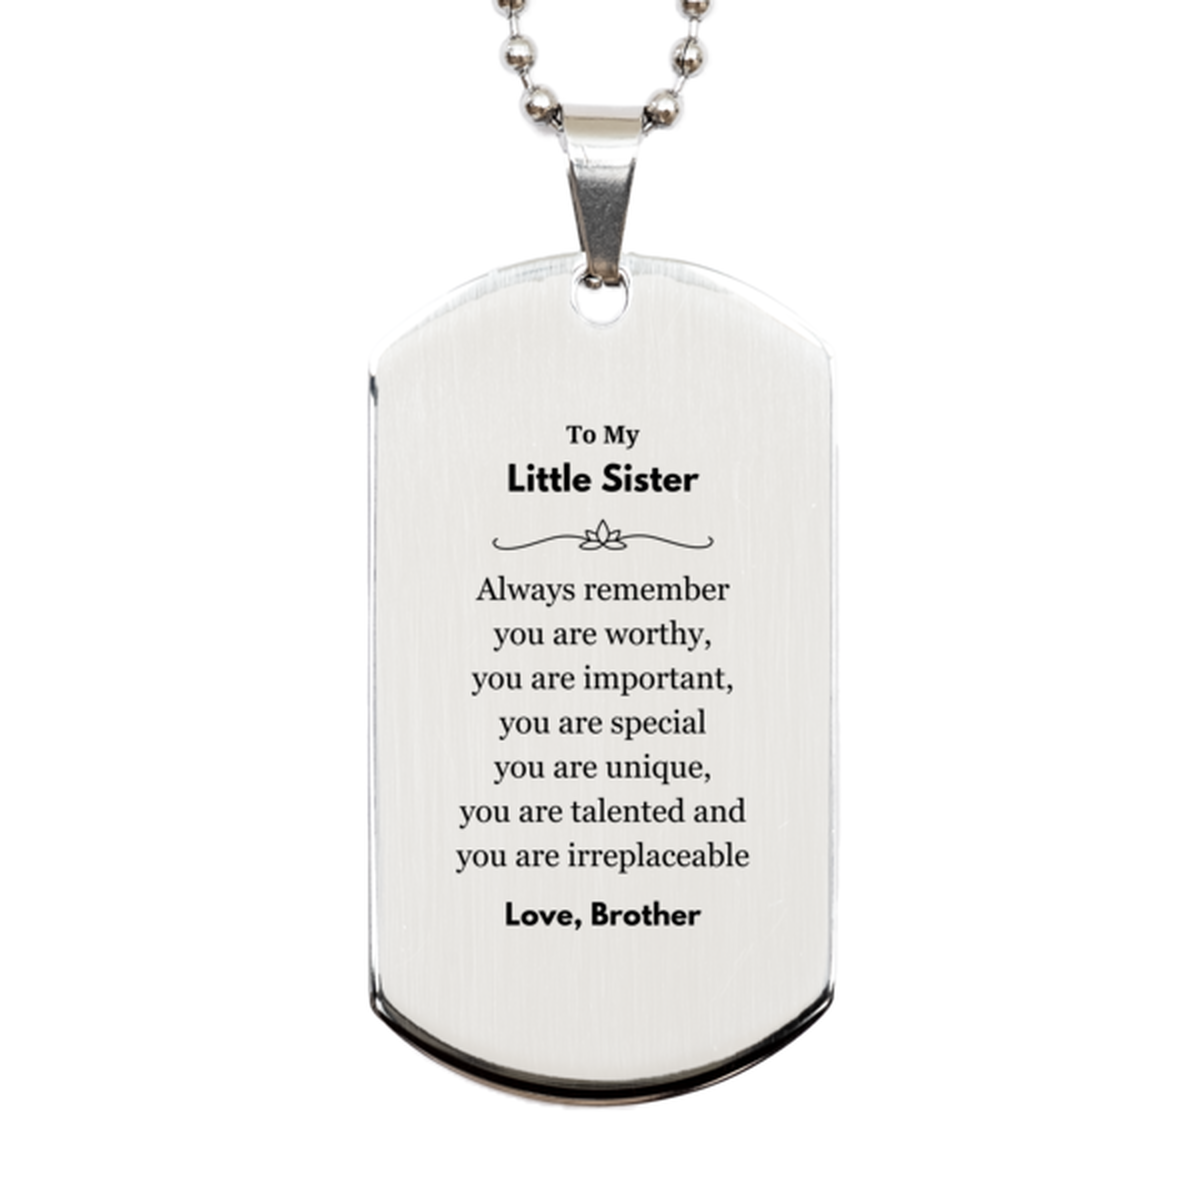 Little Sister Birthday Gifts from Brother, Inspirational Silver Dog Tag for Little Sister Christmas Graduation Gifts for Little Sister Always remember you are worthy, you are important. Love, Brother